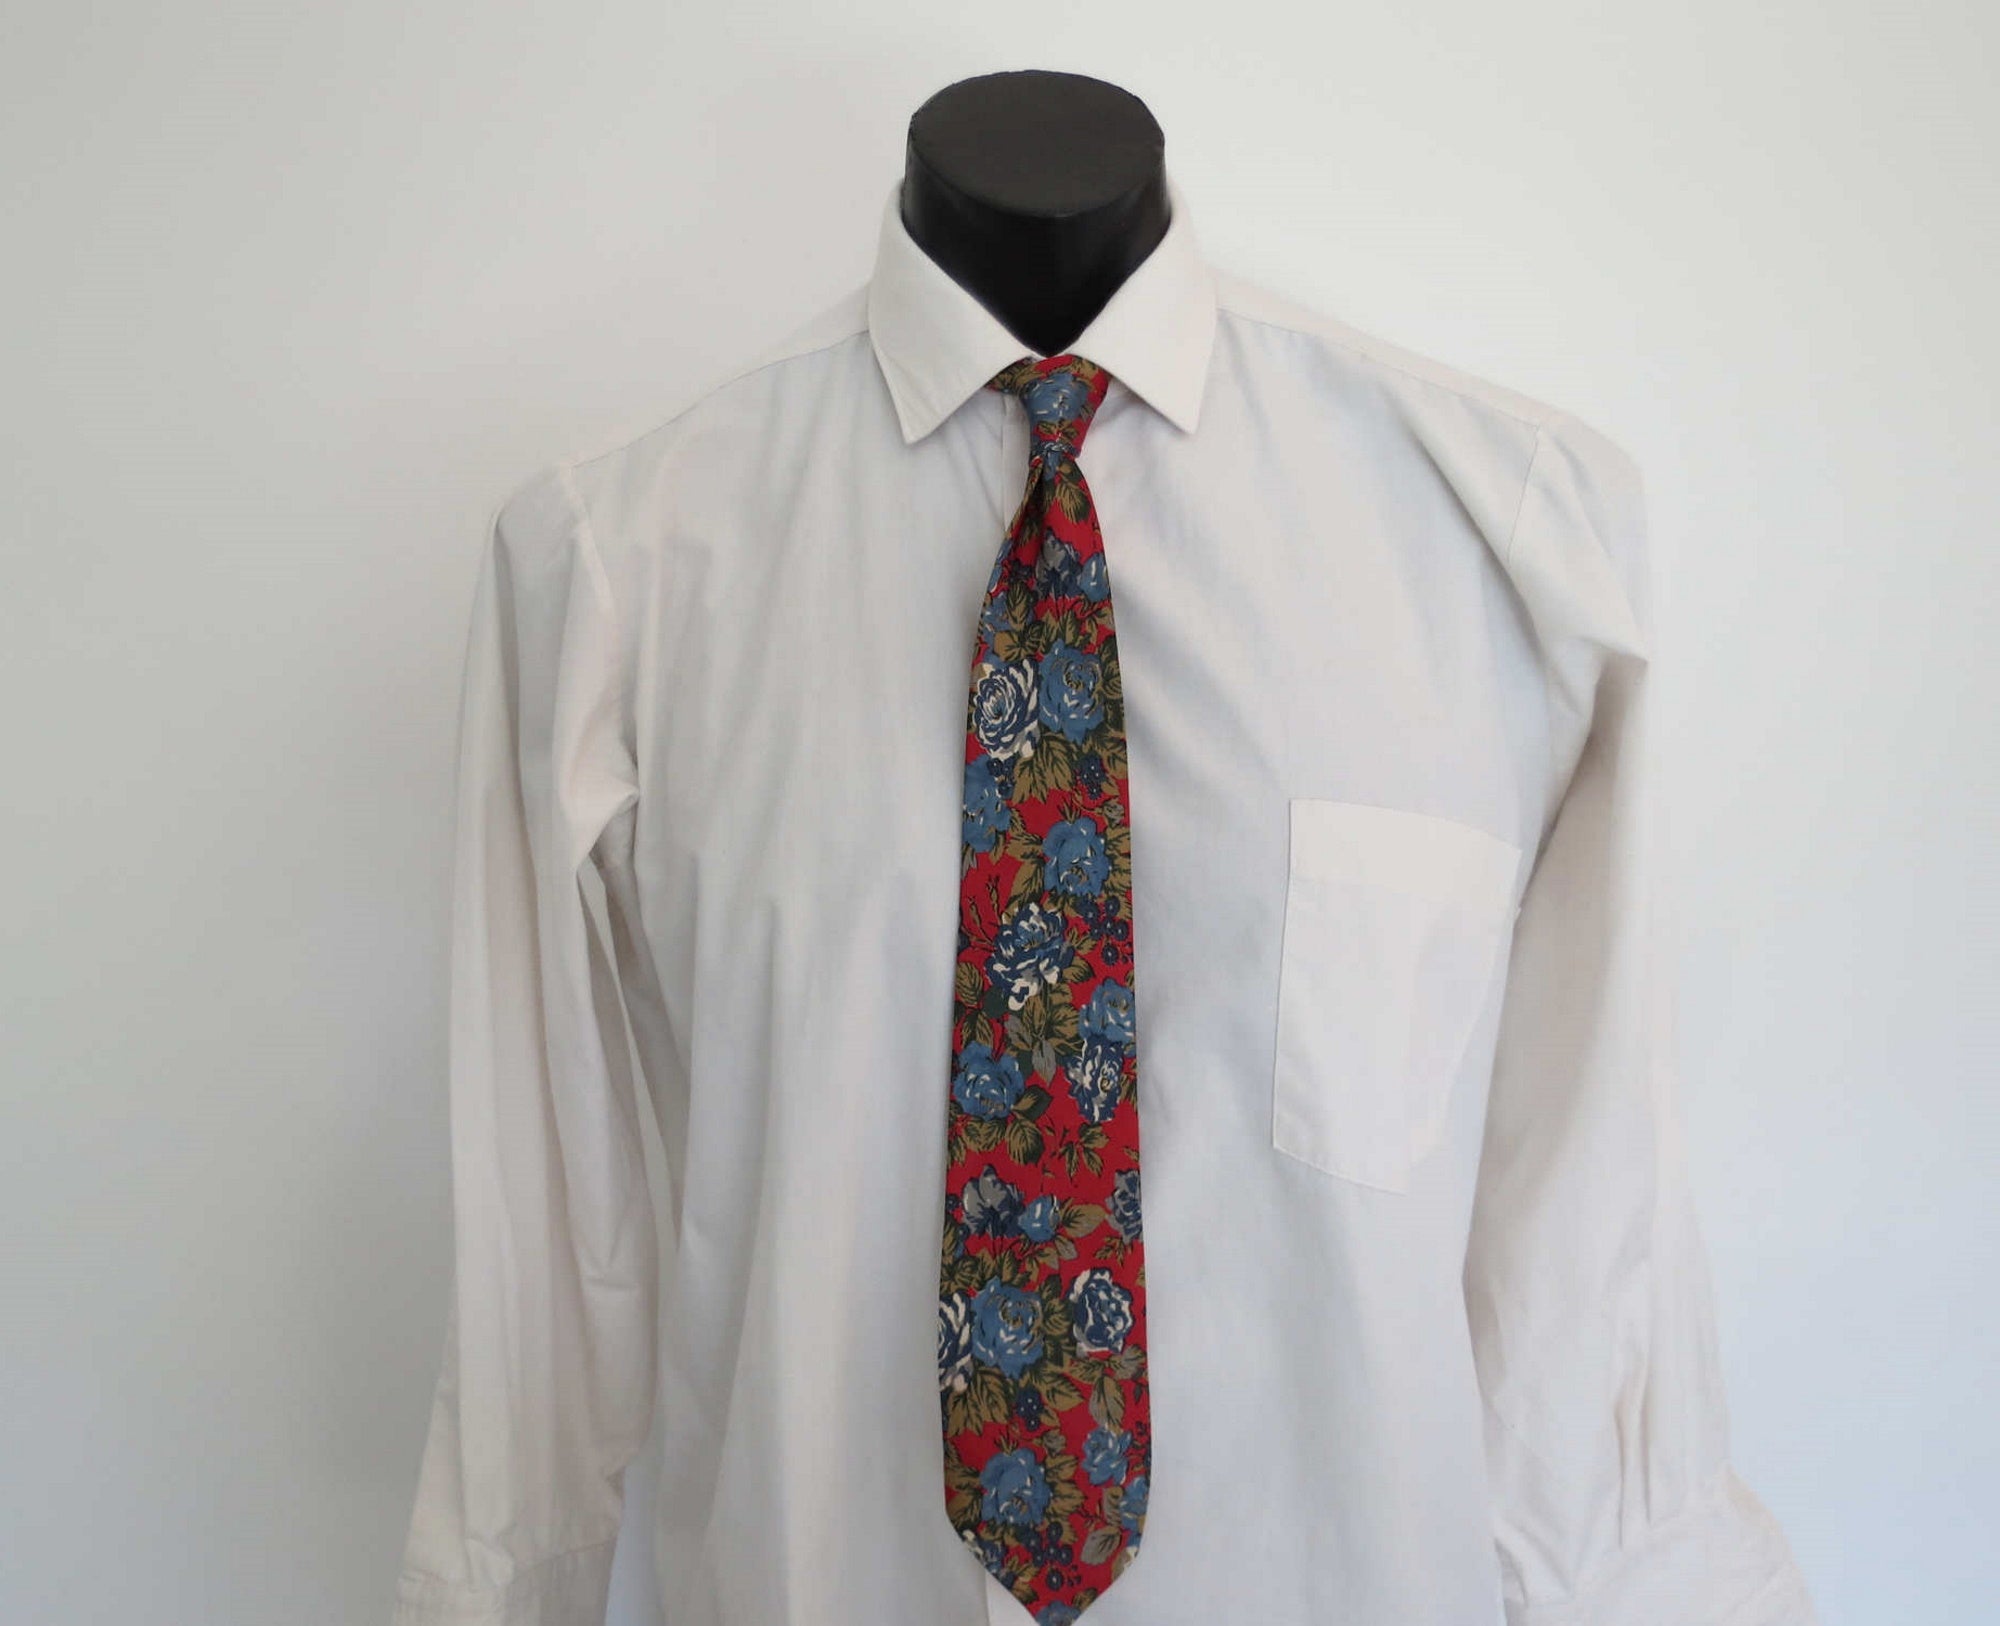 Red & Blue Floral Tie by Hardy Amies